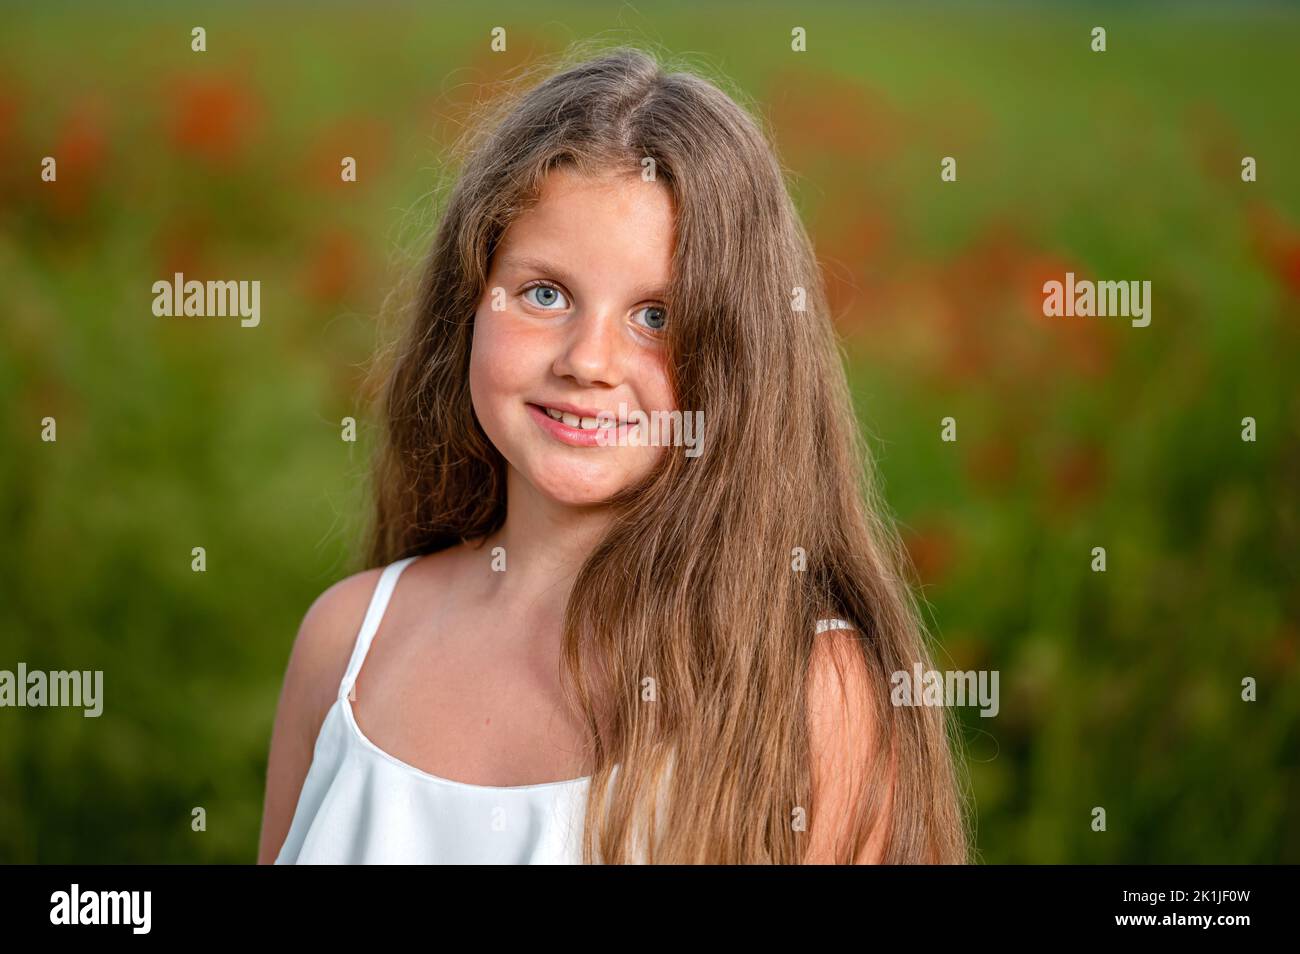 portrait of a little girl against the background of a field of poppies in the evening sunlight Stock Photo